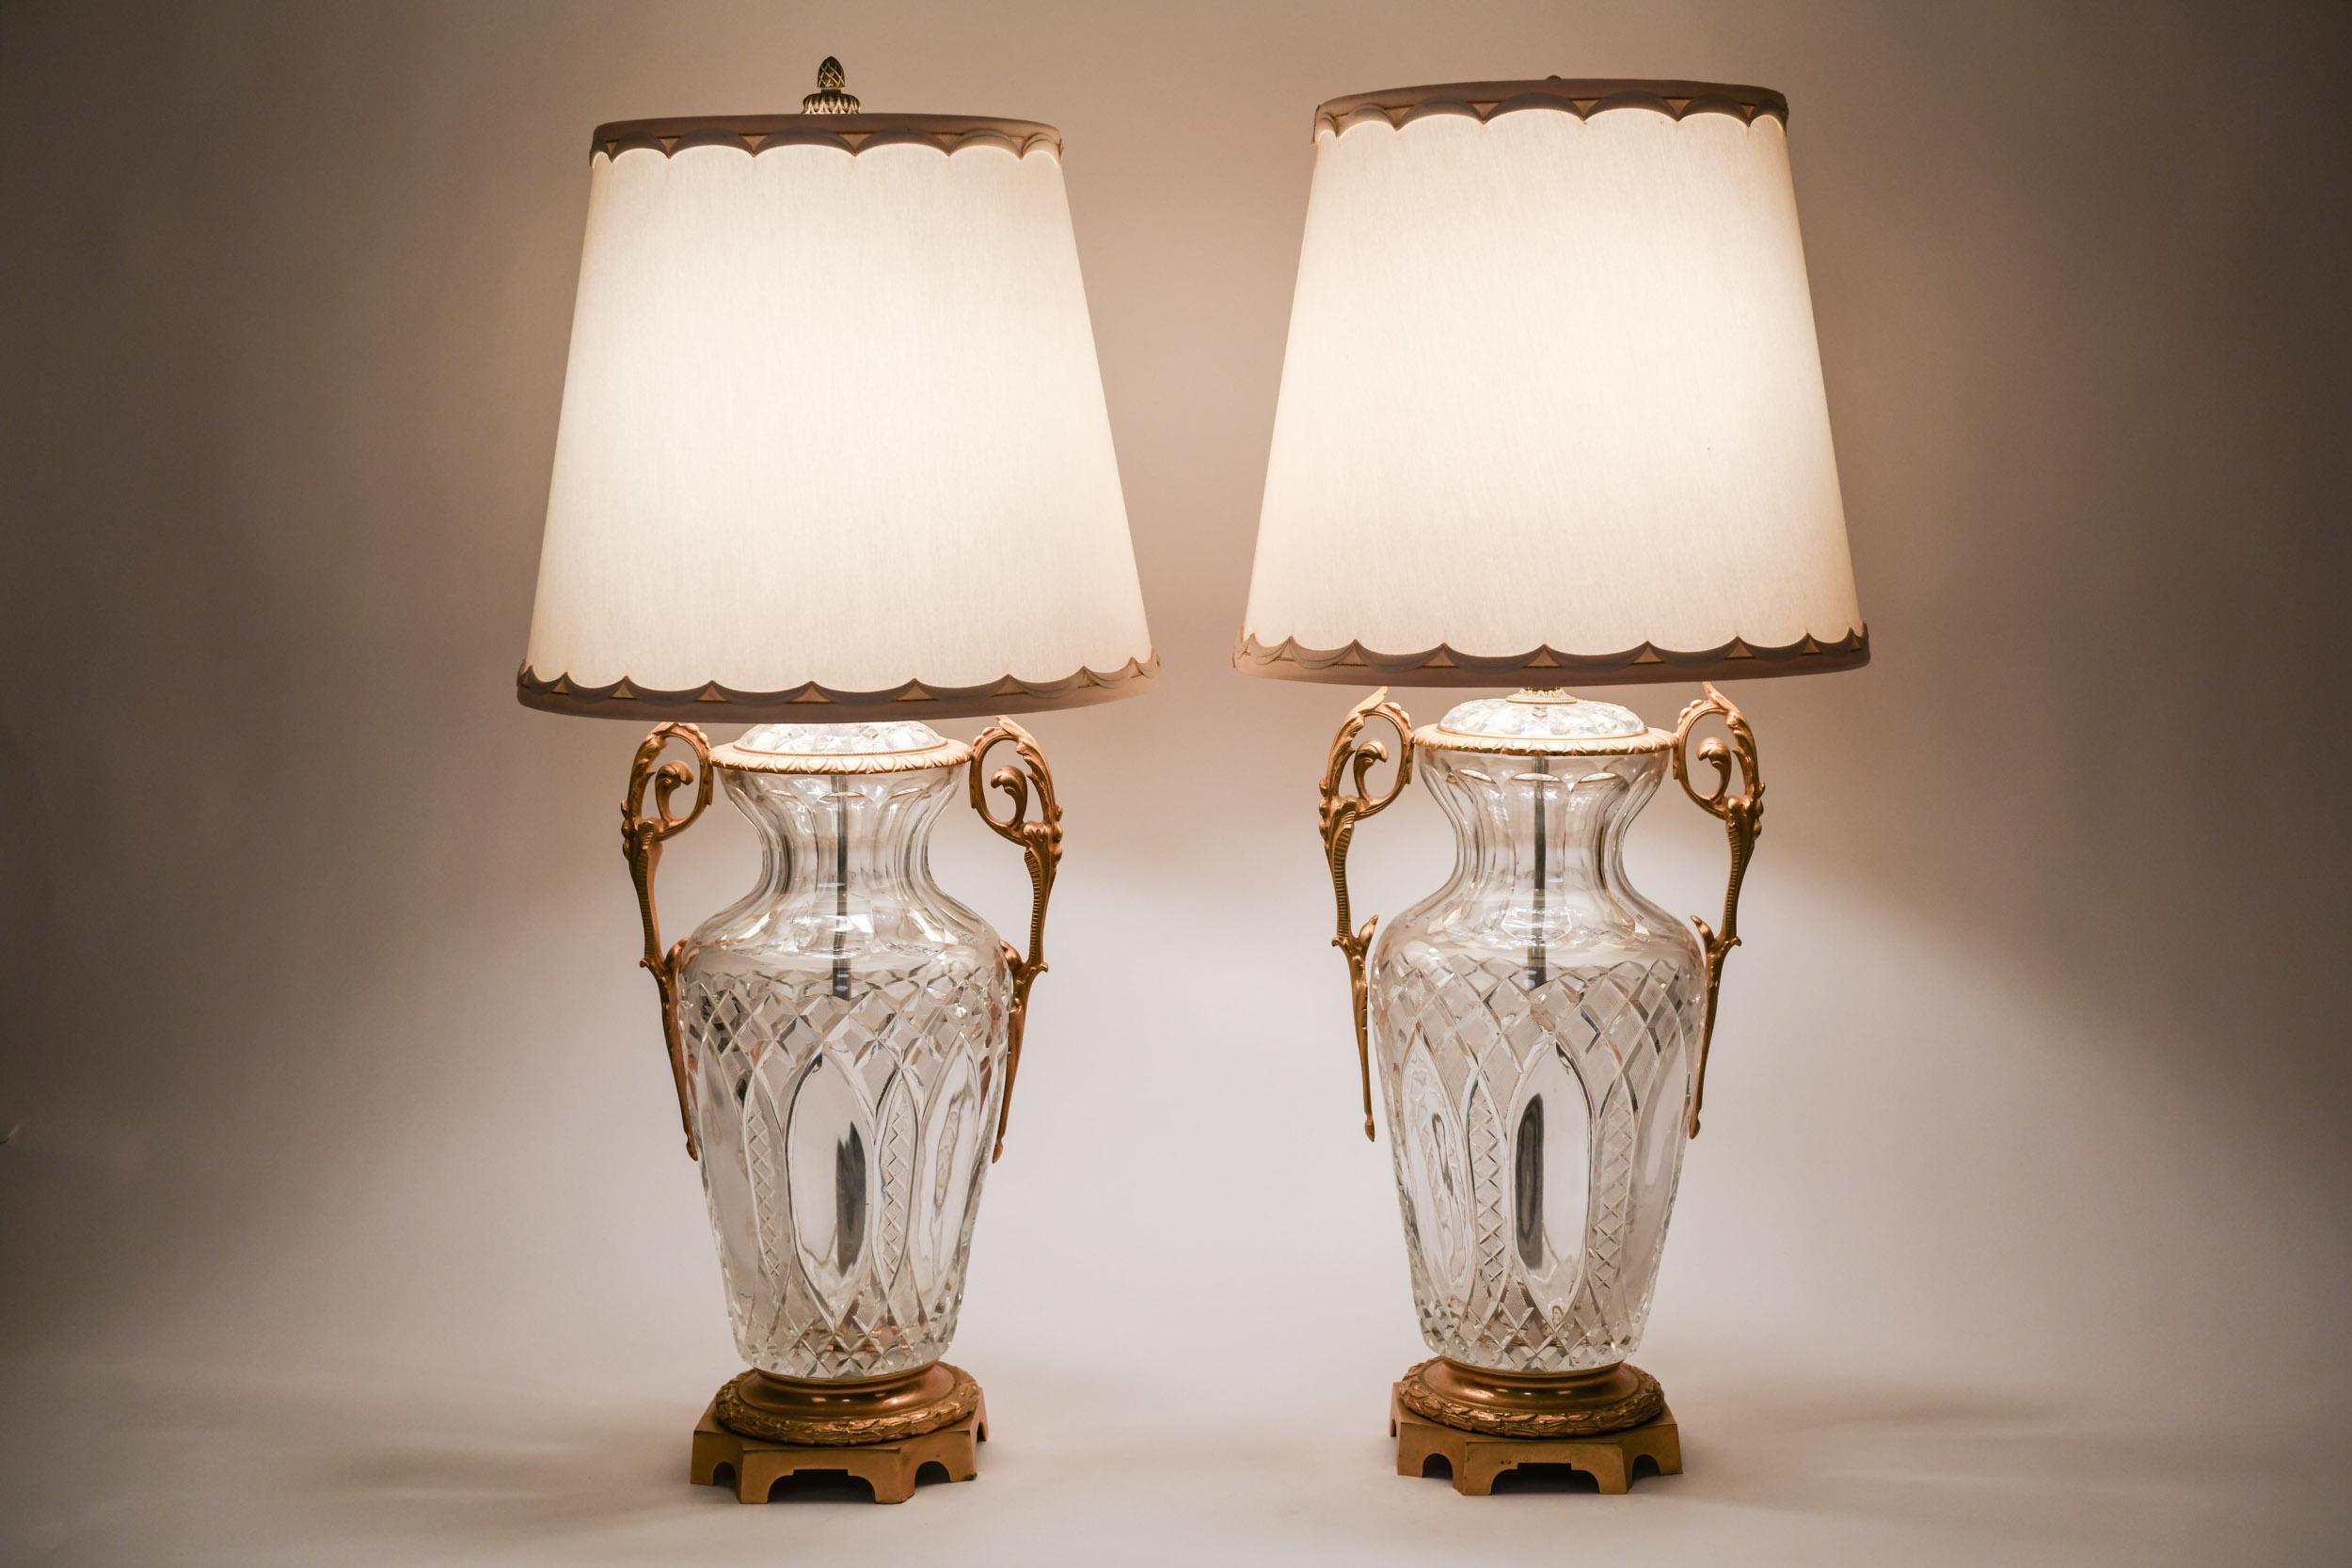 English Bronze-Mounted Cut Crystal Pair Early 19th Century Lamps